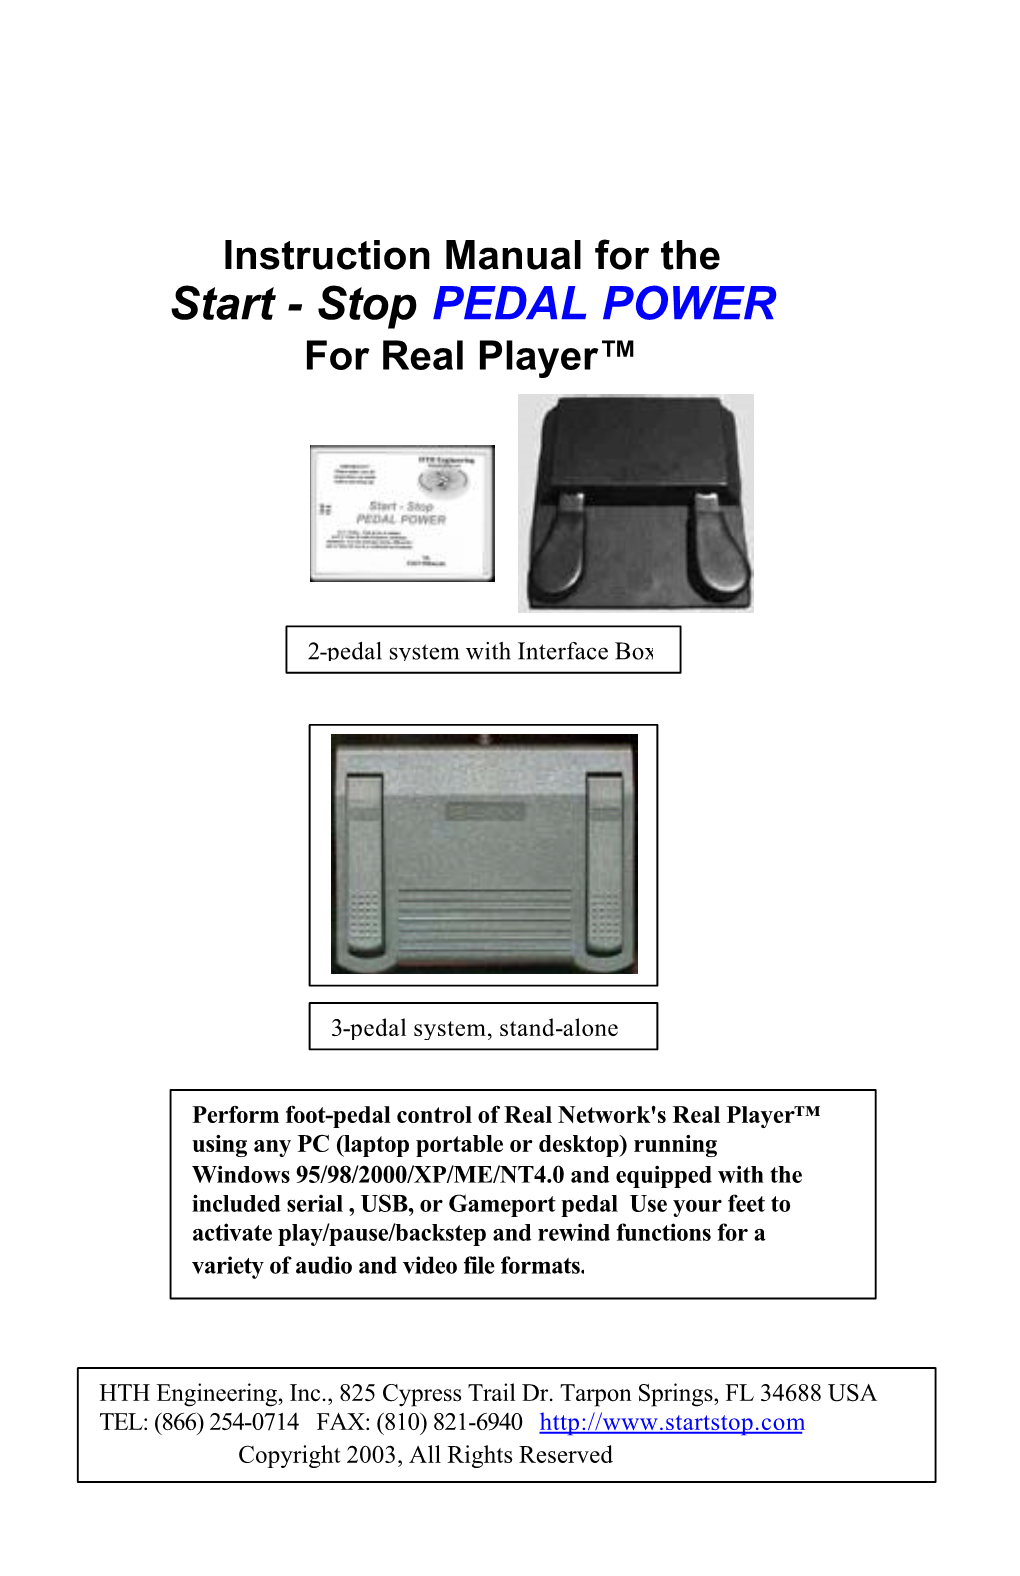 Instruction Manual for the Start - Stop PEDAL POWER for Real Player™